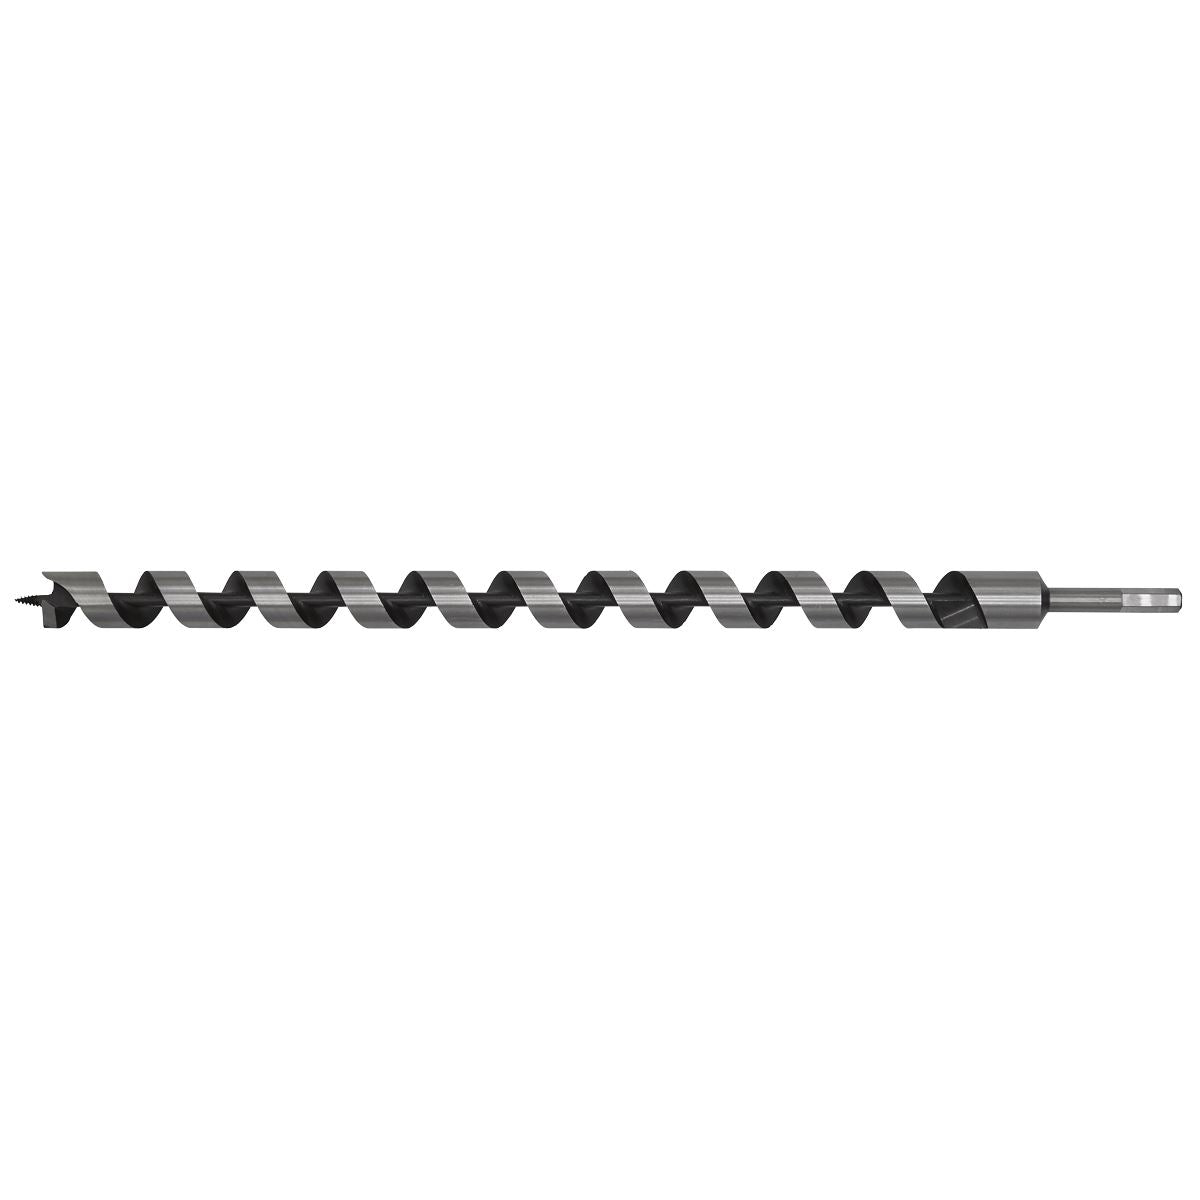 Worksafe by Sealey Auger Wood Drill Bit 28mm x 600mm